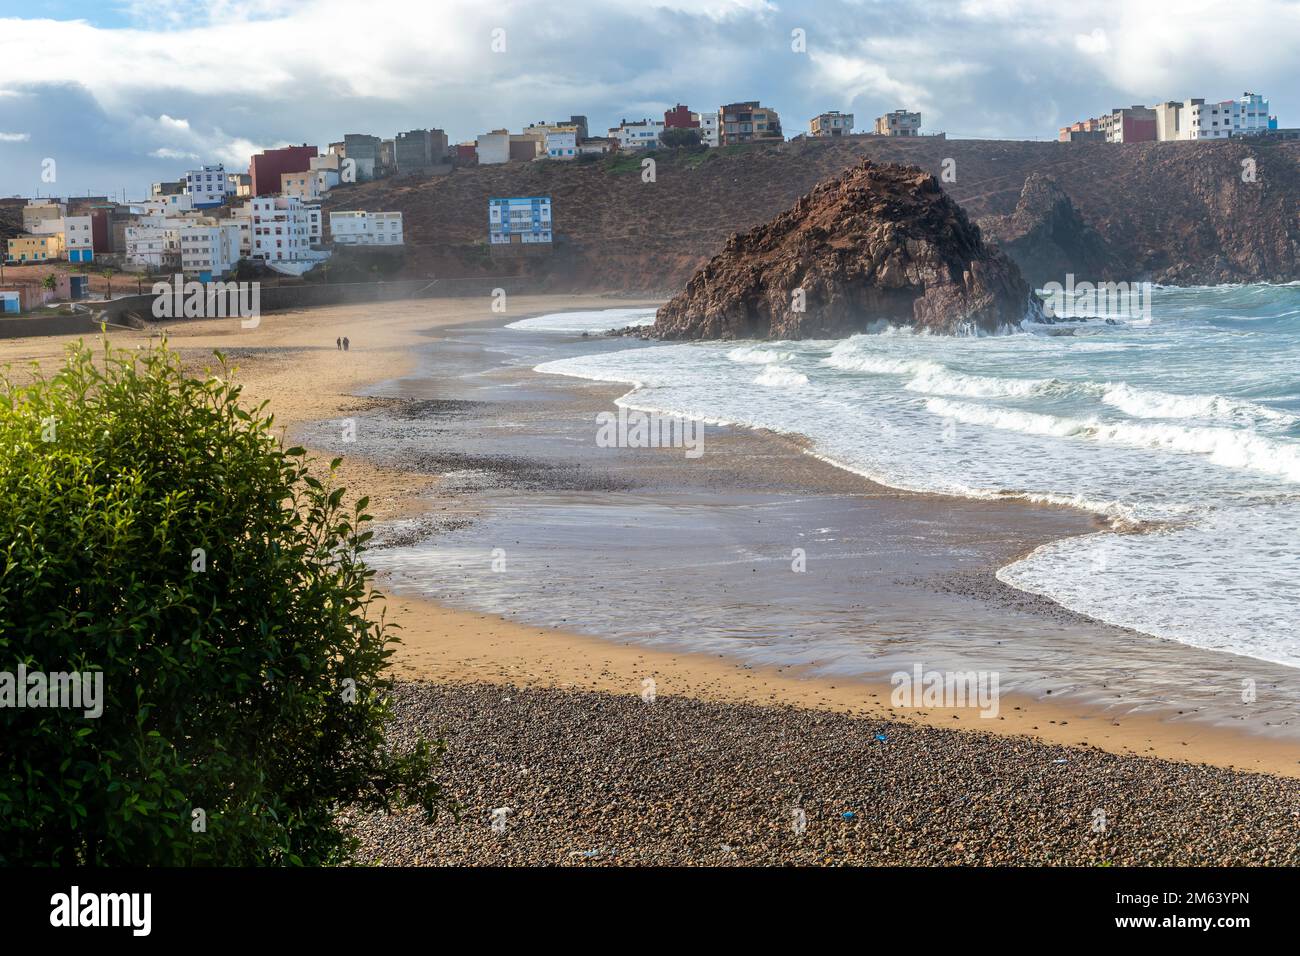 View of beach and Atlantic Ocean plage Sidi Mohammed Ben Abdellah, Mirleft, Morocco, north Africa Stock Photo